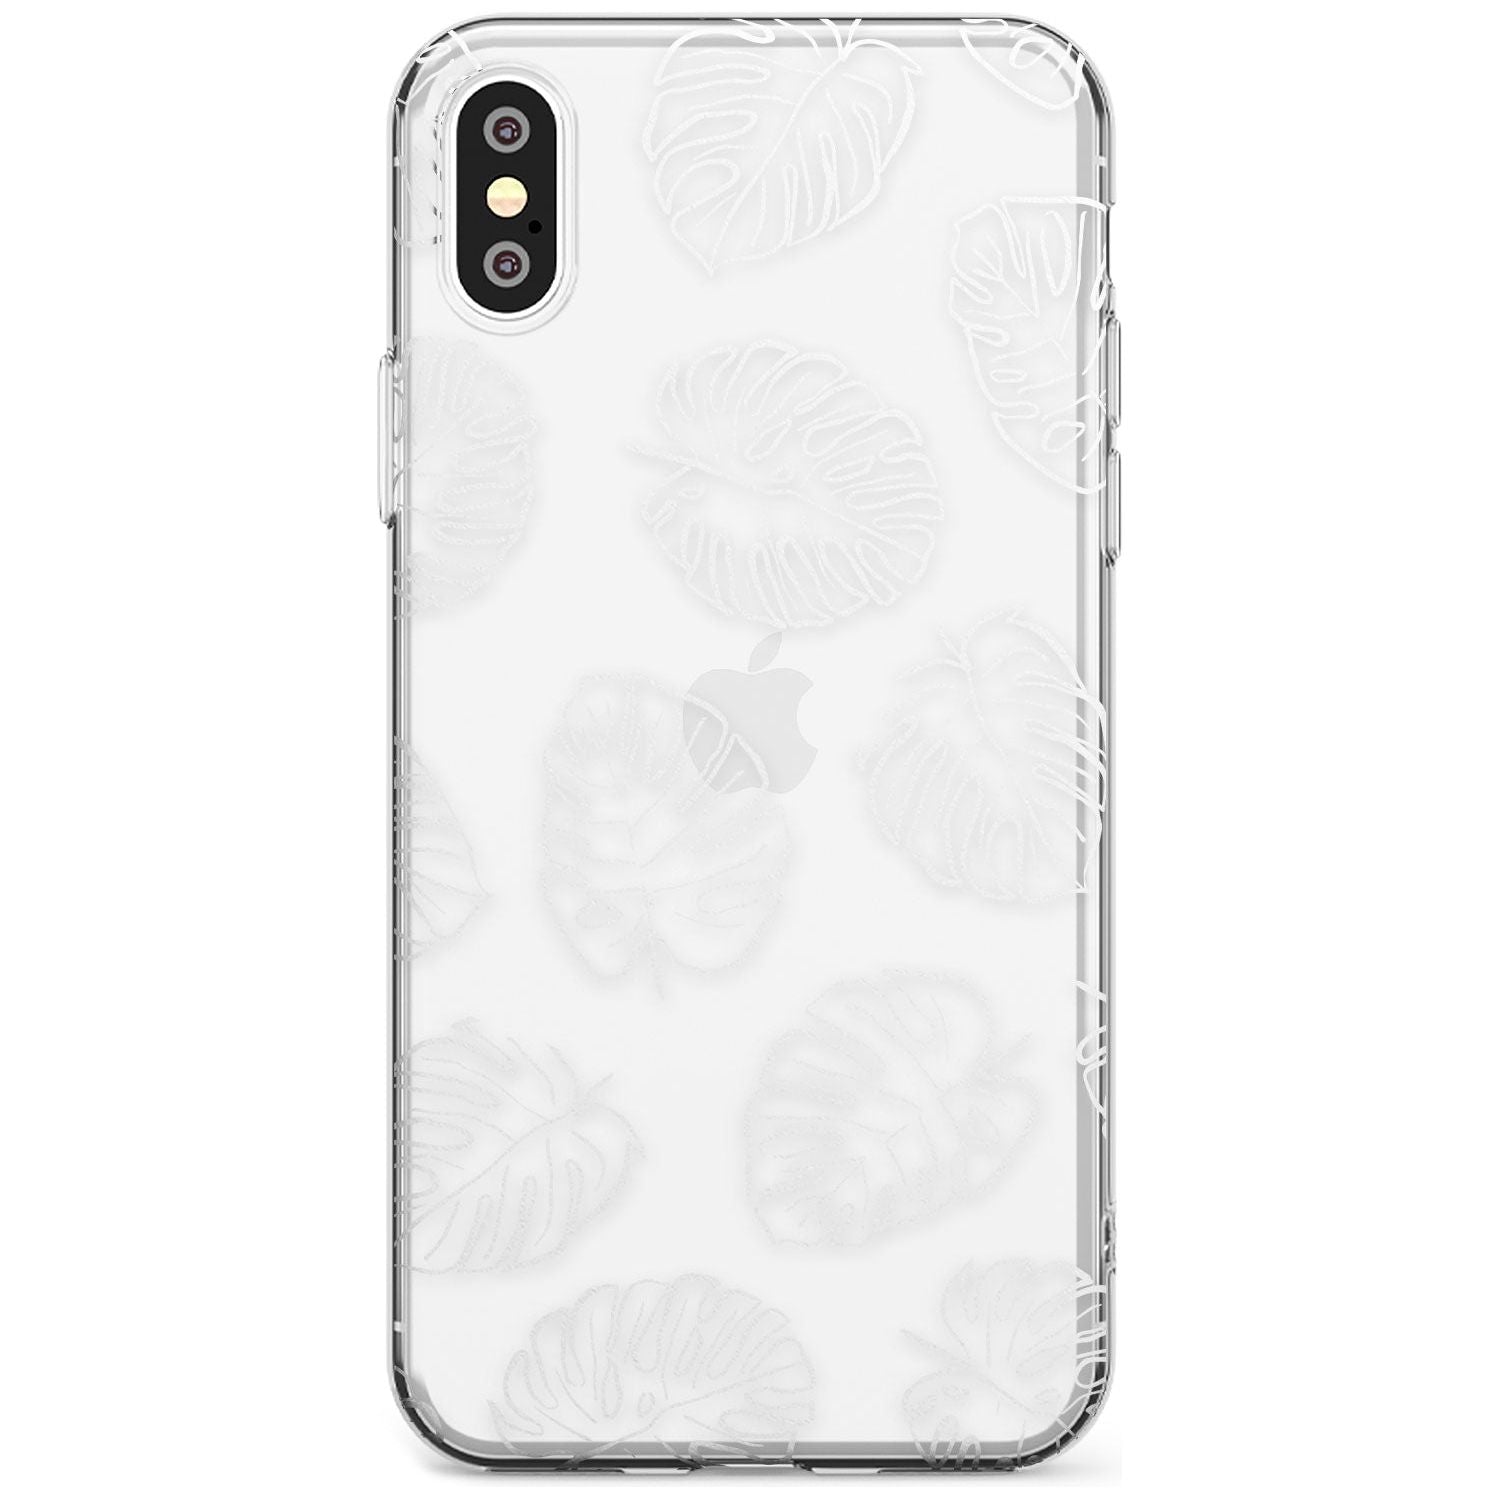 Monstera Leaves Black Impact Phone Case for iPhone X XS Max XR